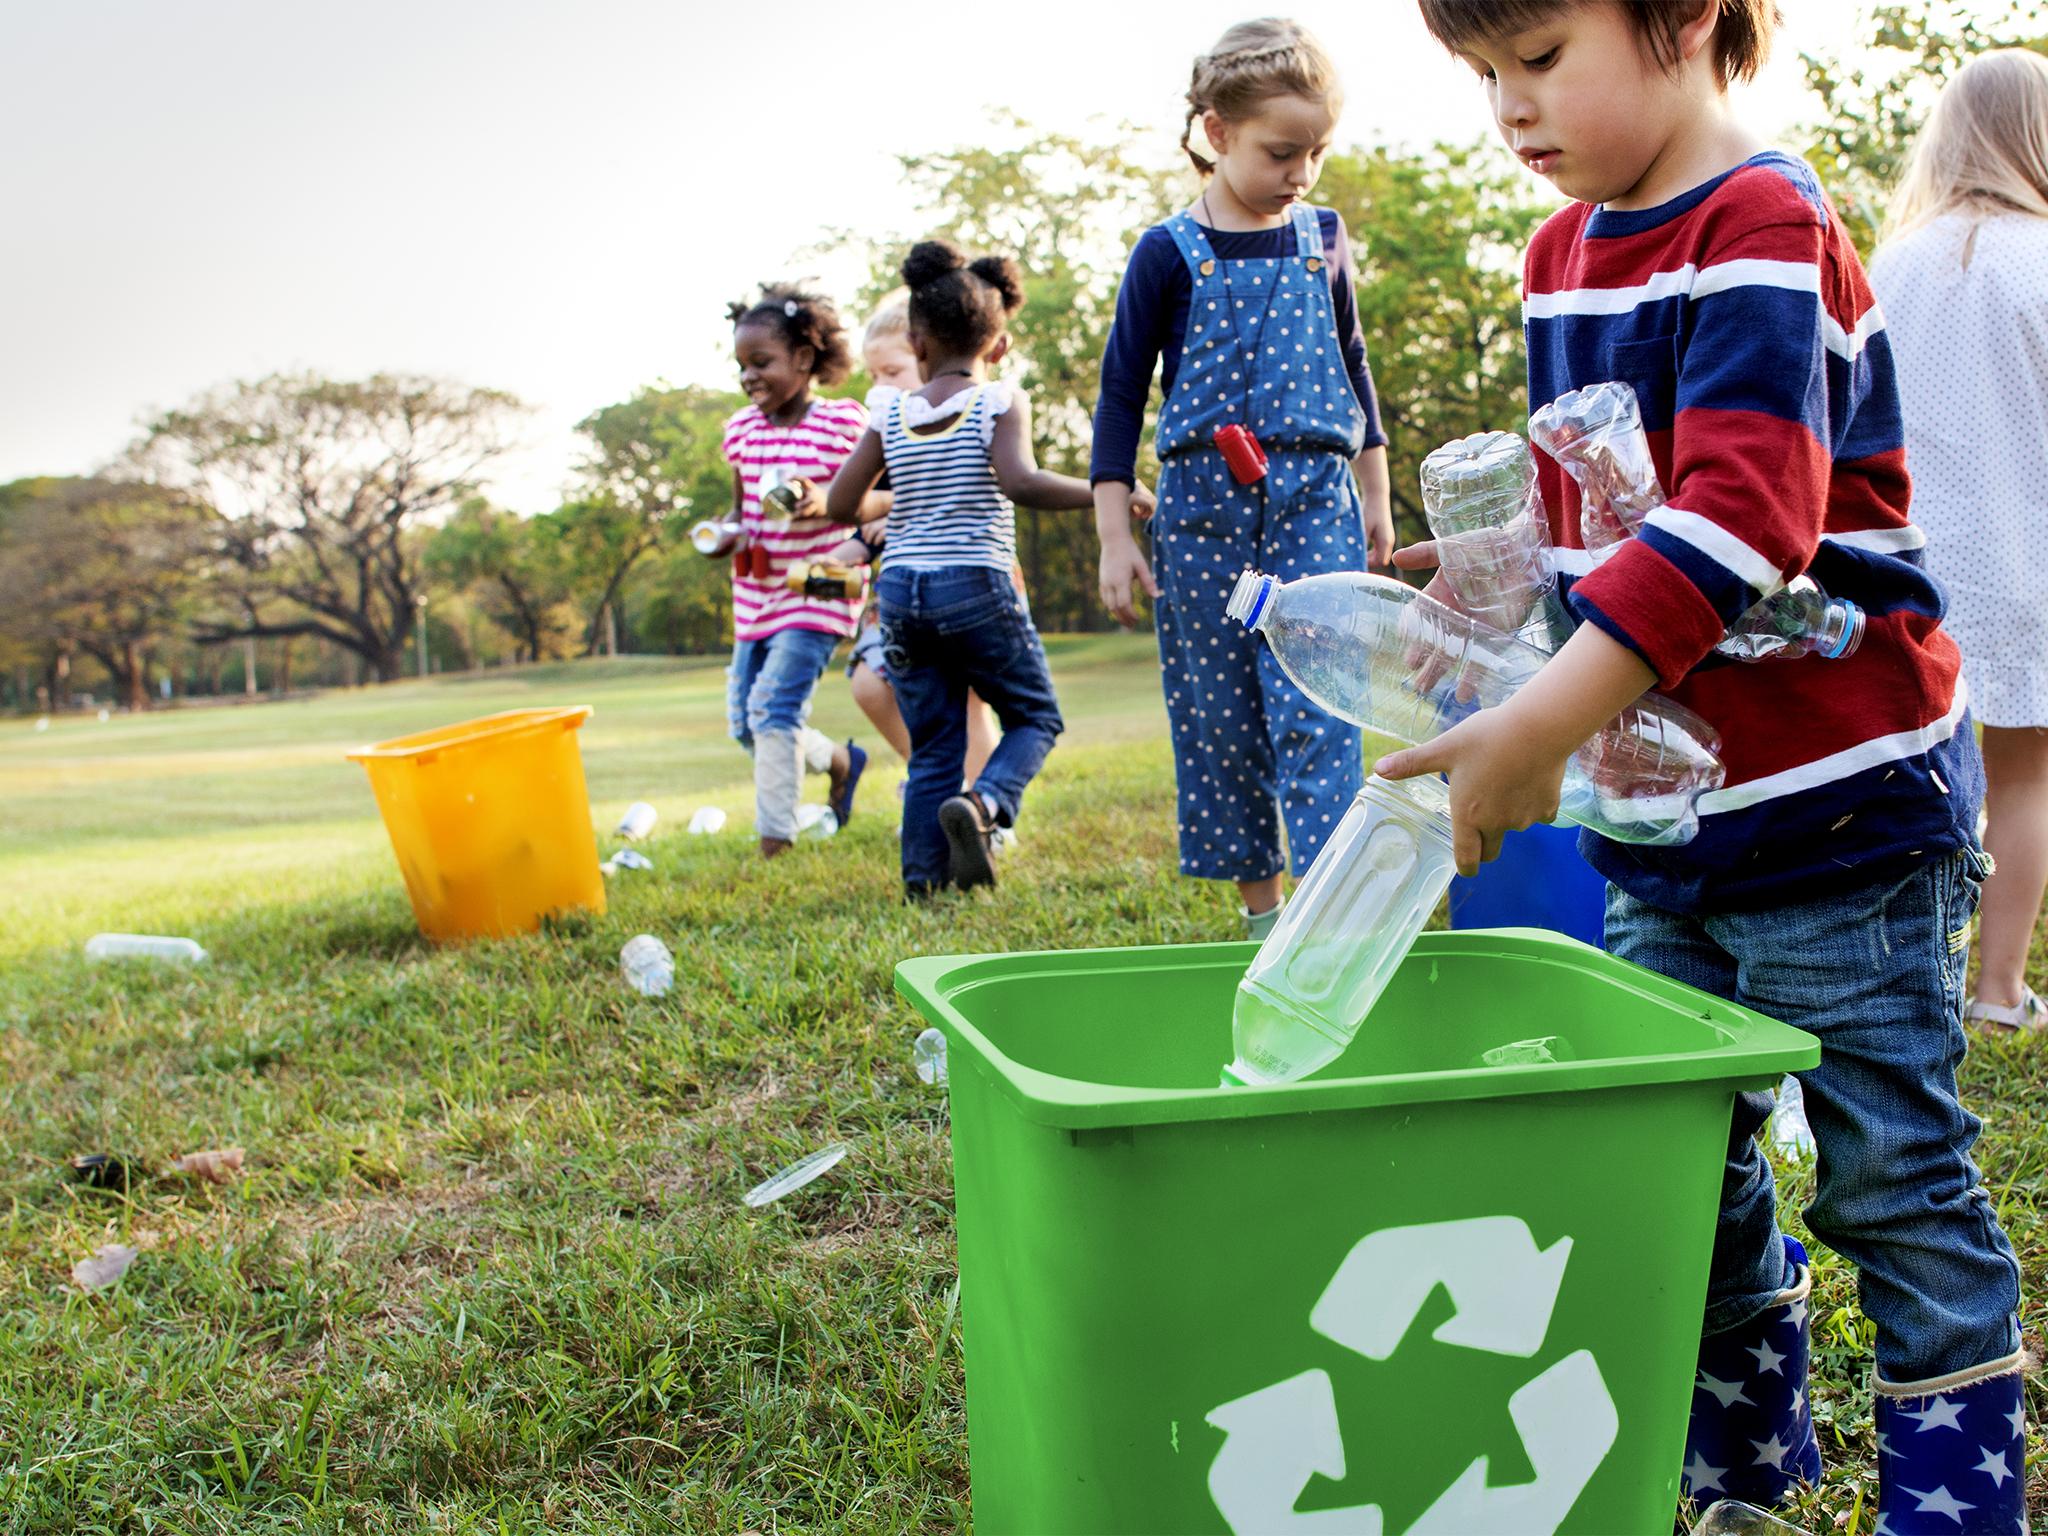 One fewer child per family would have the same effect on the planet as 684 teenagers deciding to become serious recyclers for the rest of their lives, according to research